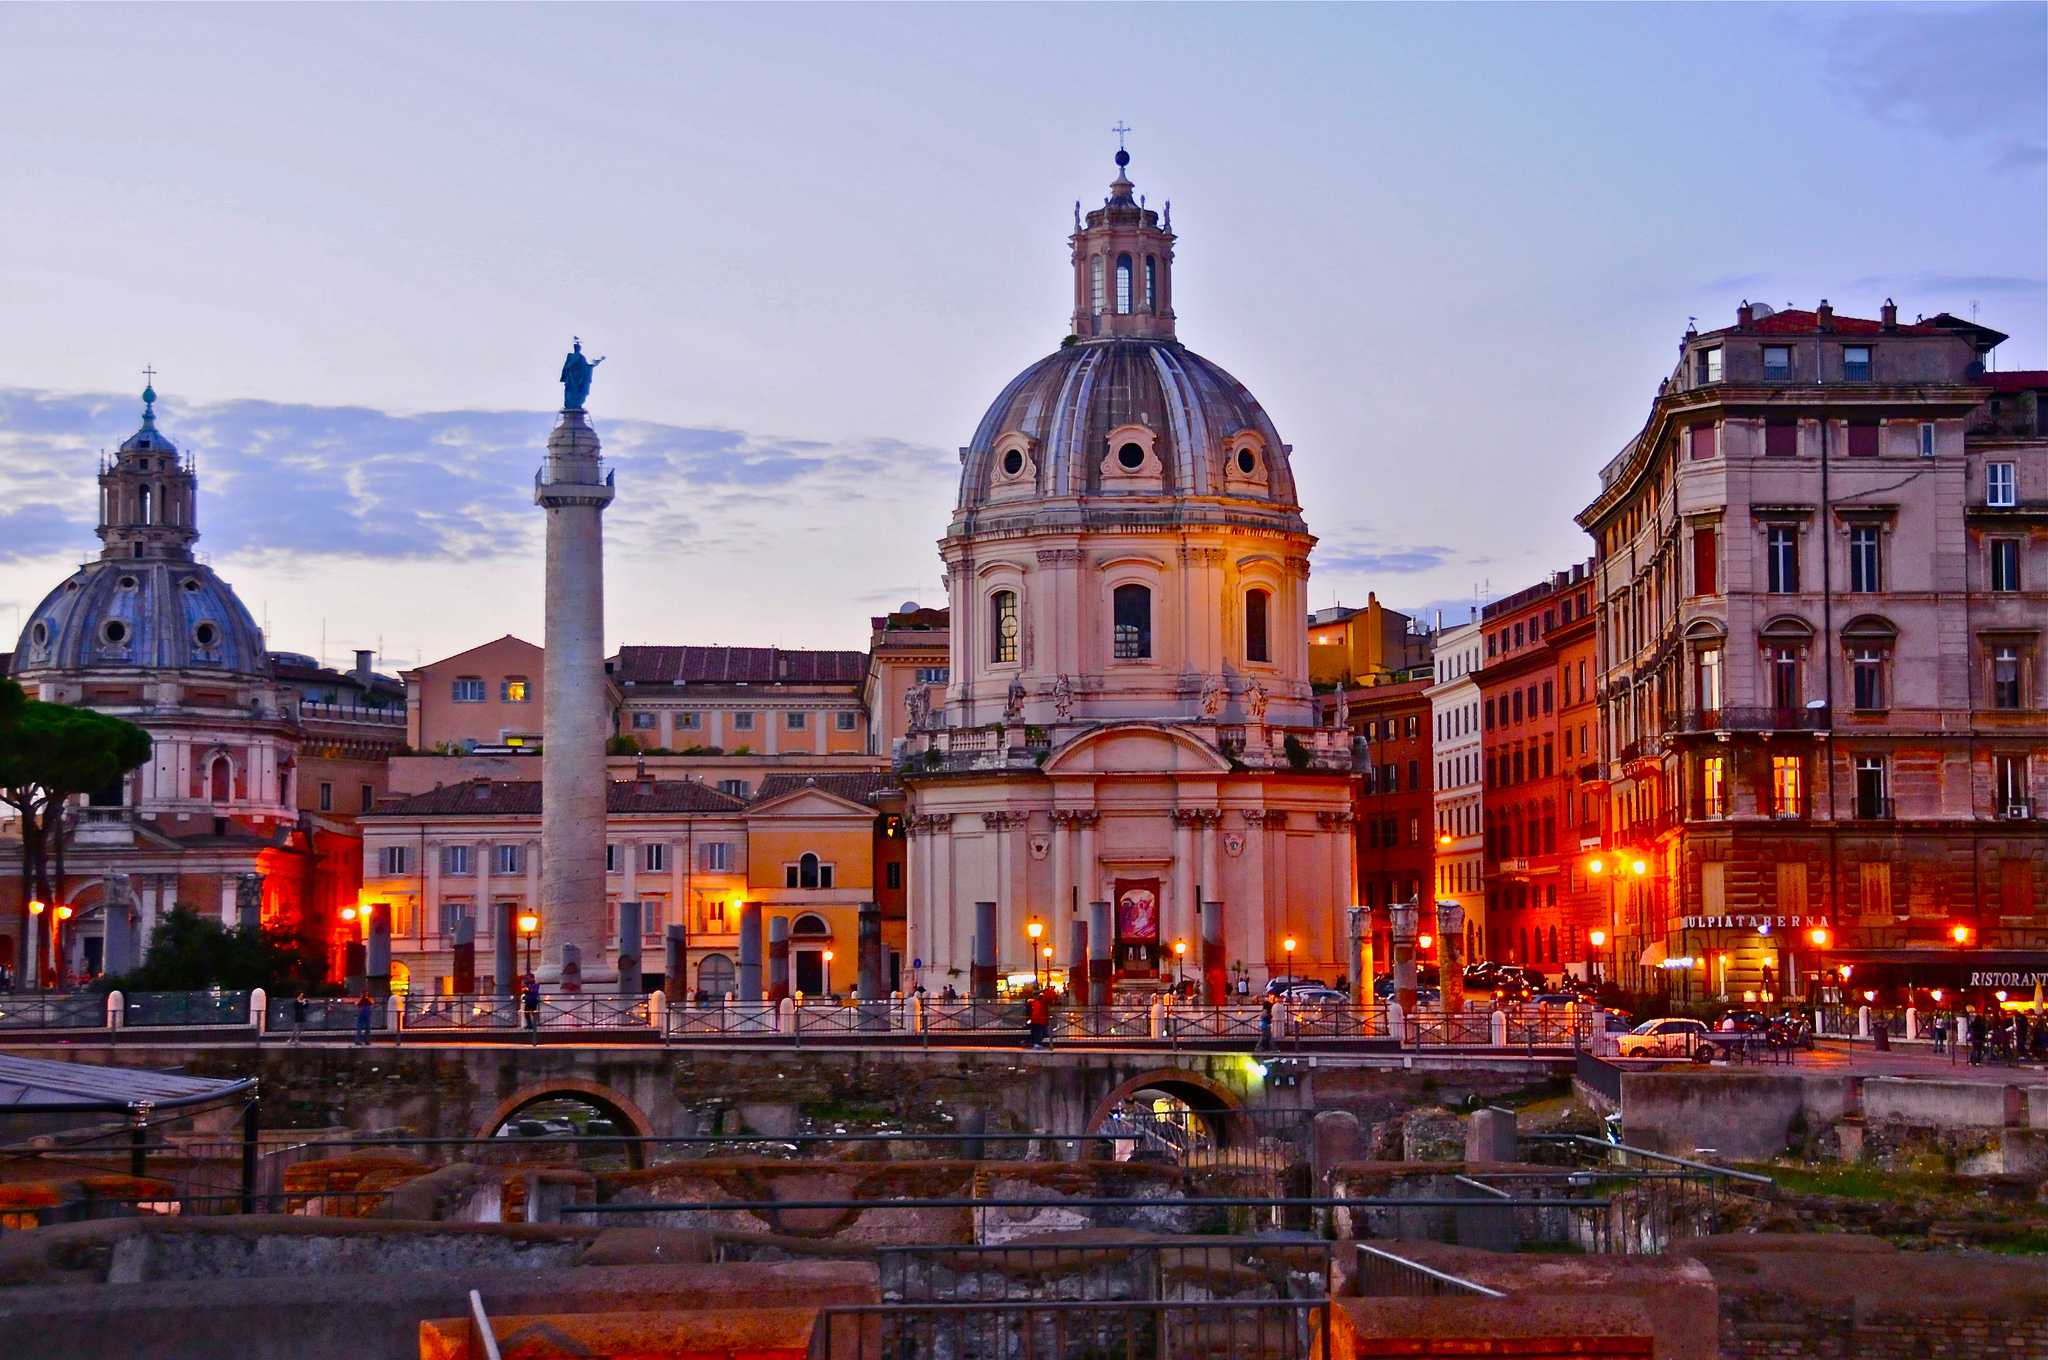 rome, church, man made, architecture, city, italy, sky, sunset, cities